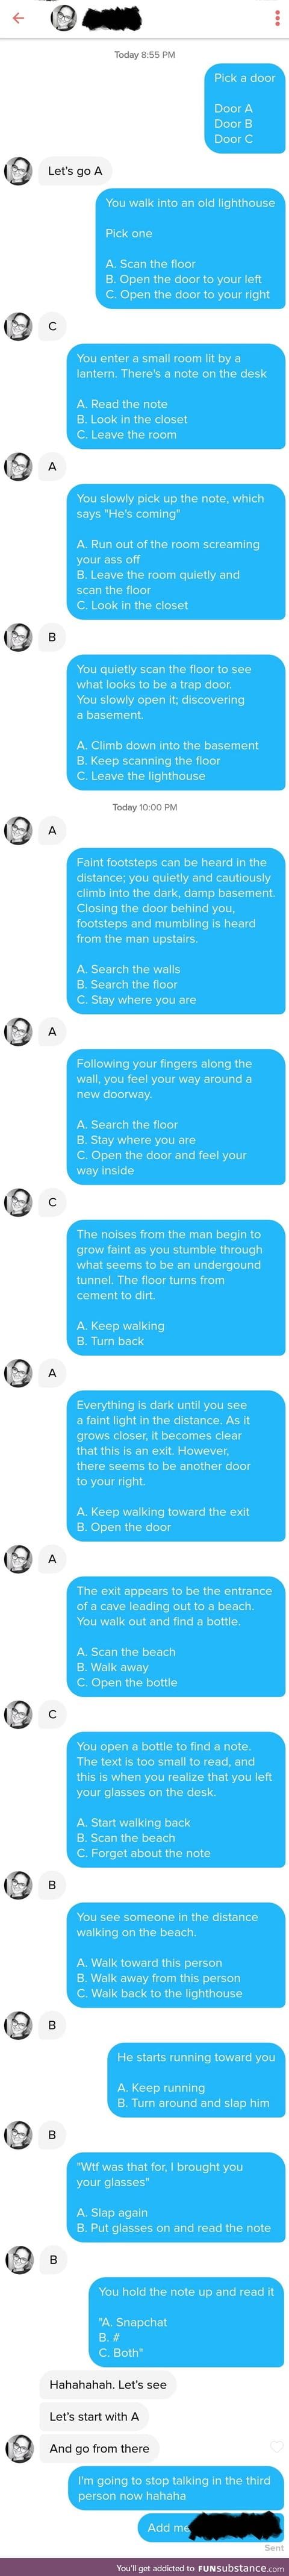 Guy creates an interactive story on tinder